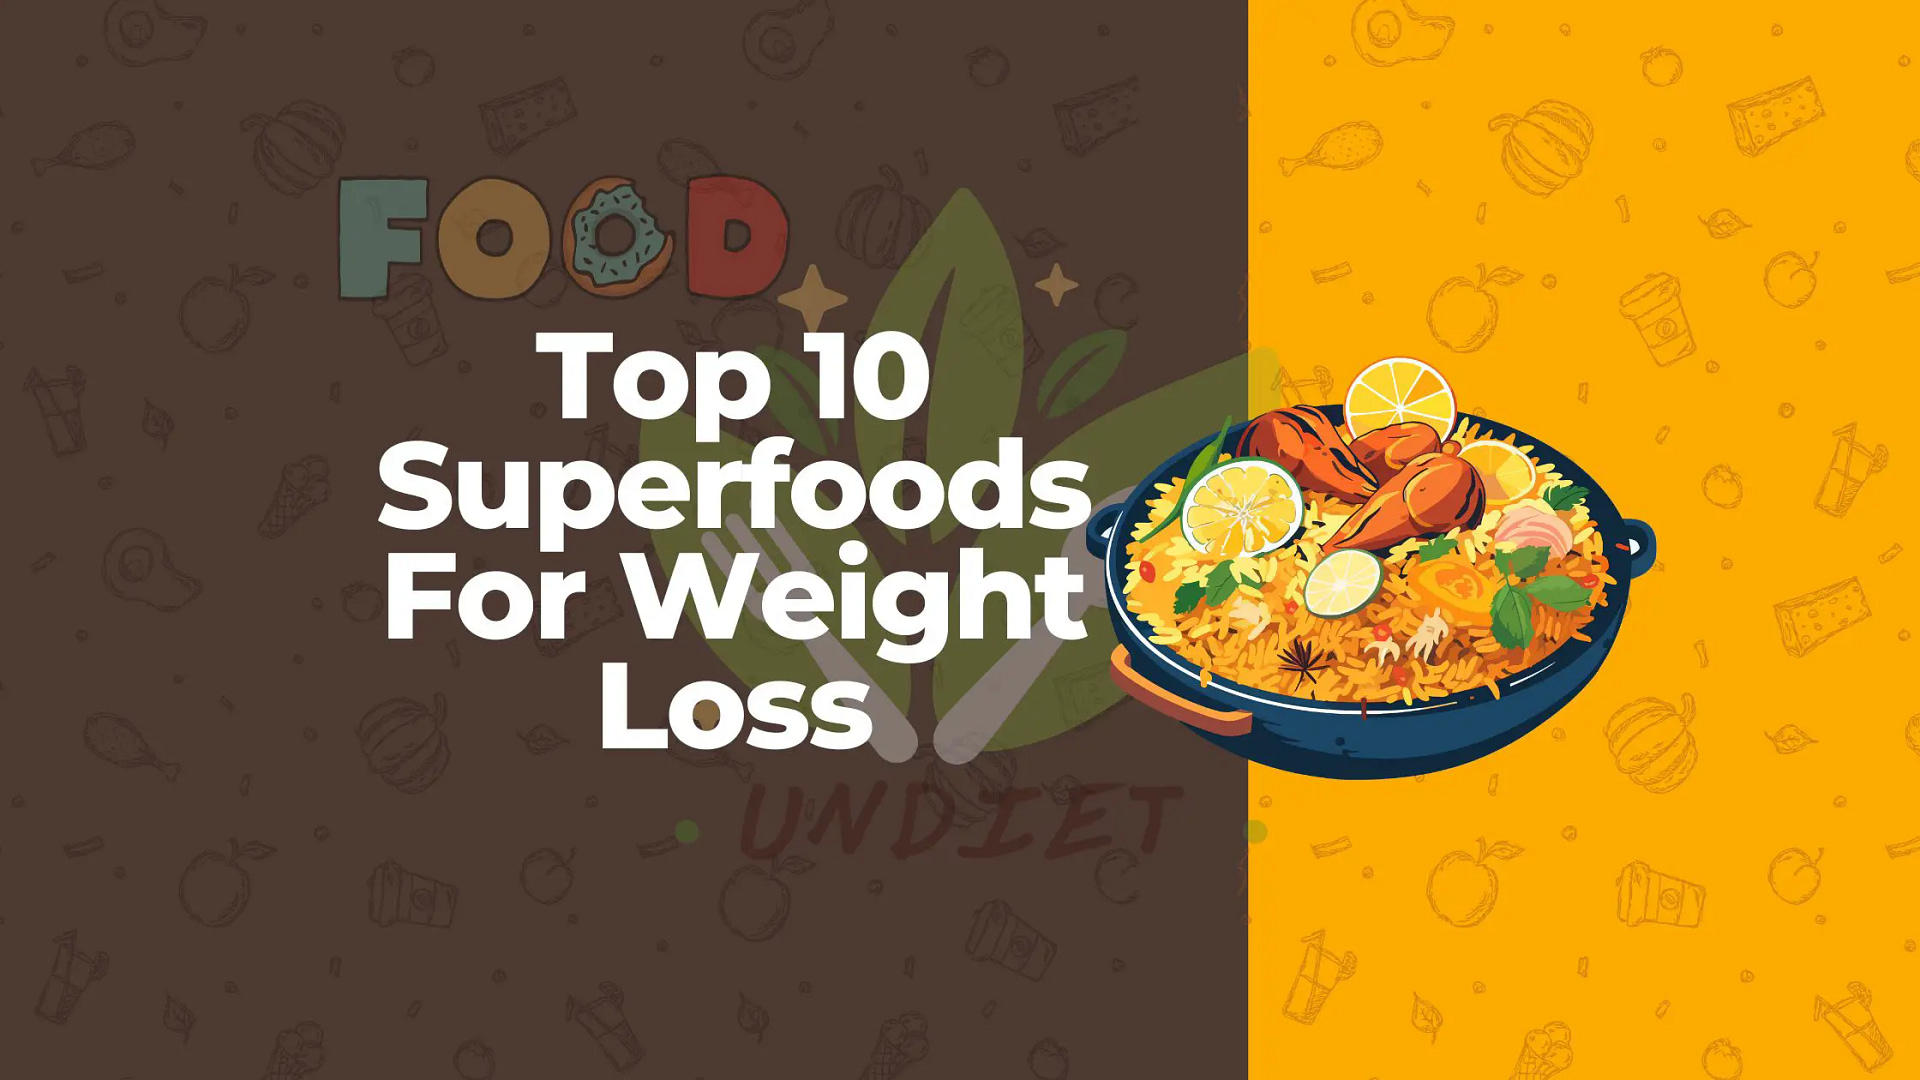 Top 10 Superfoods For Weight Loss